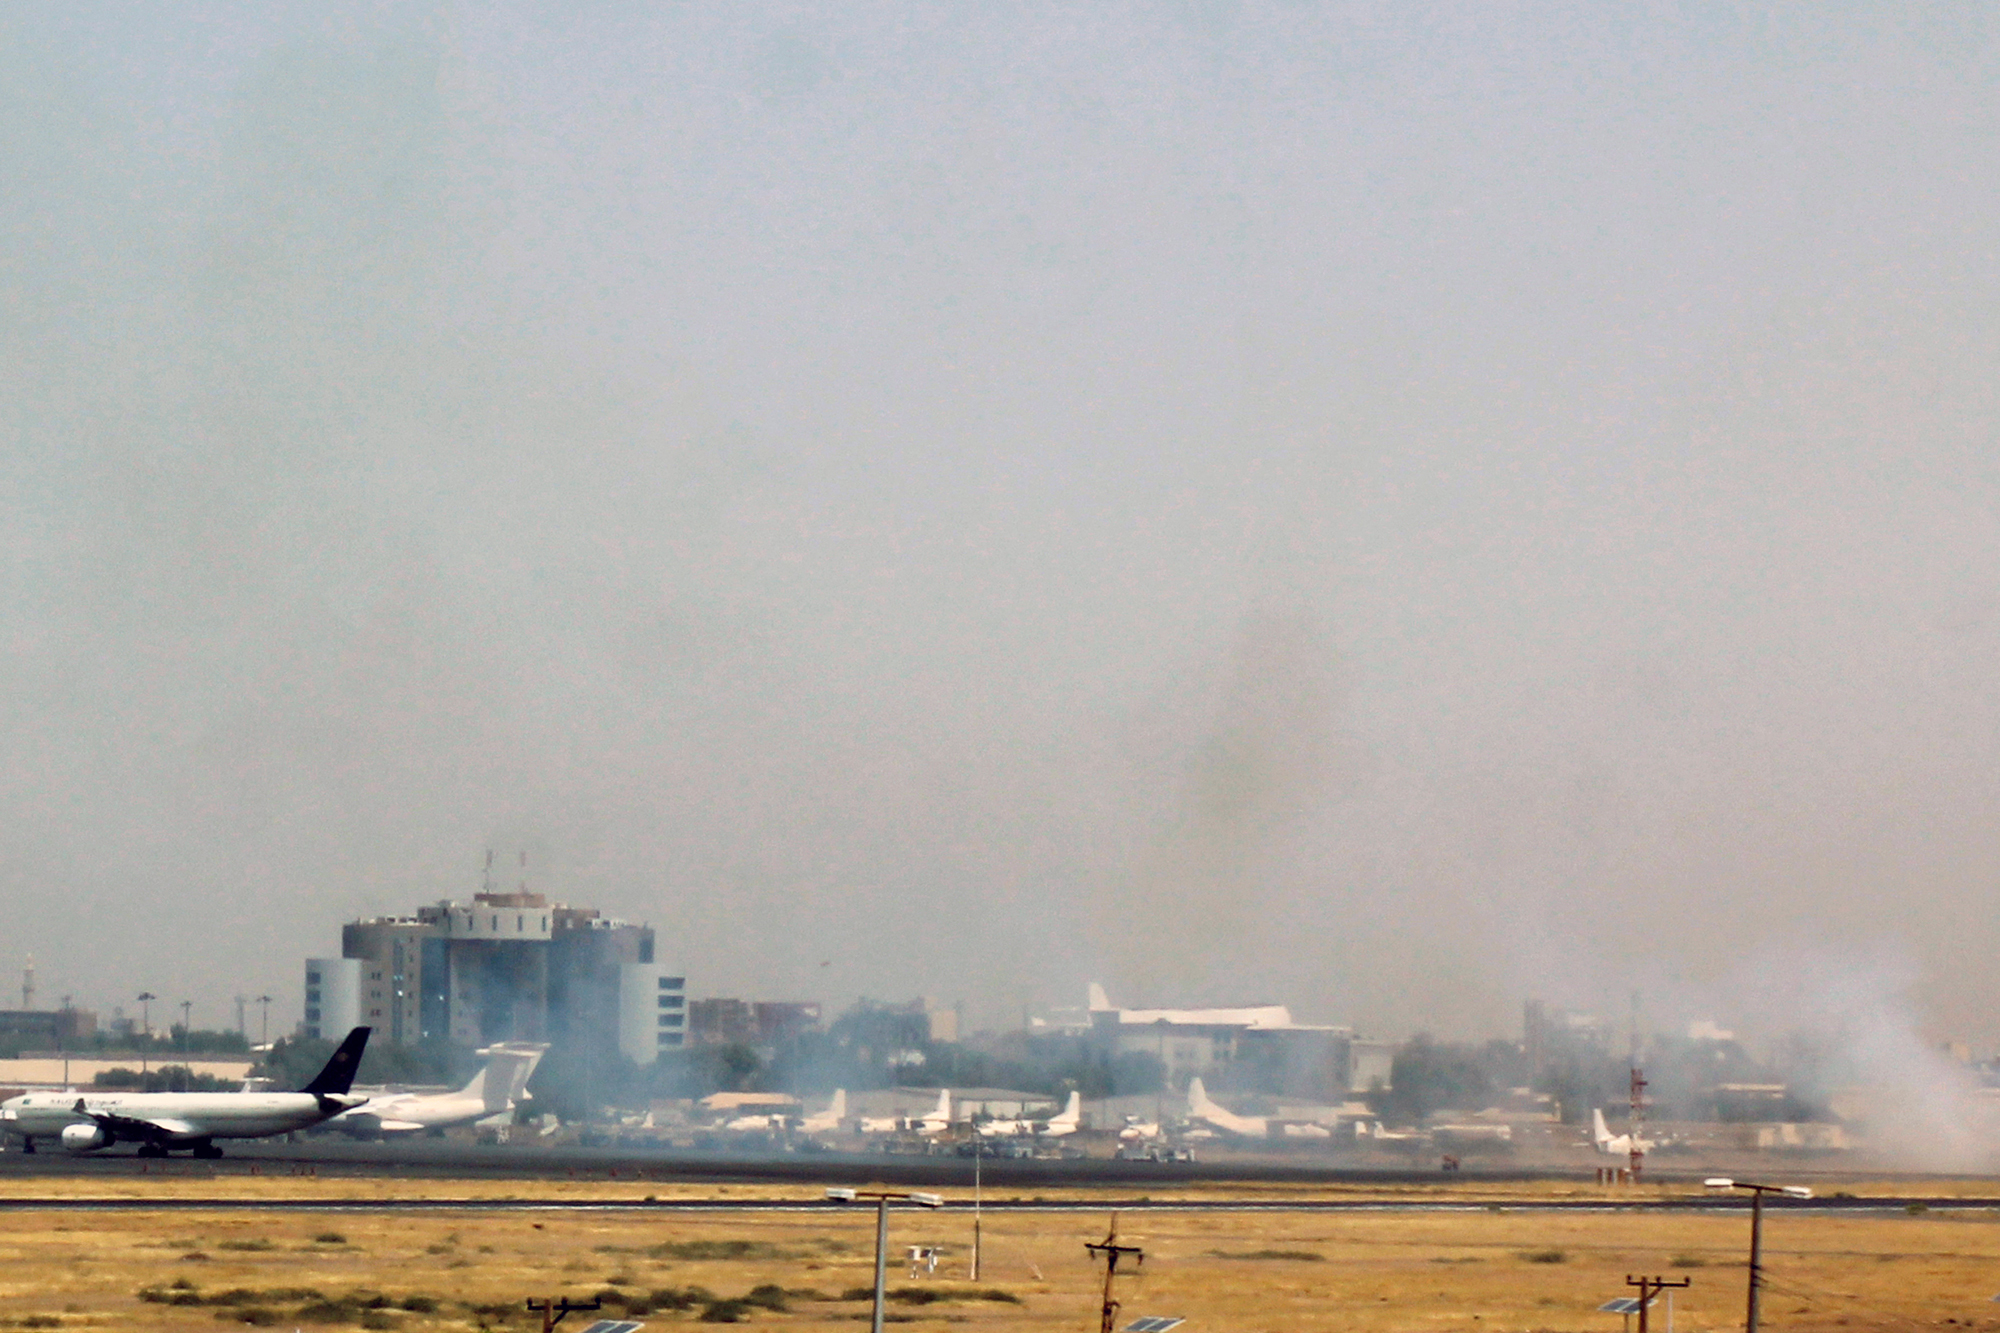 Smoke is seen on the tarmac of Khartoum's airport on April 15.